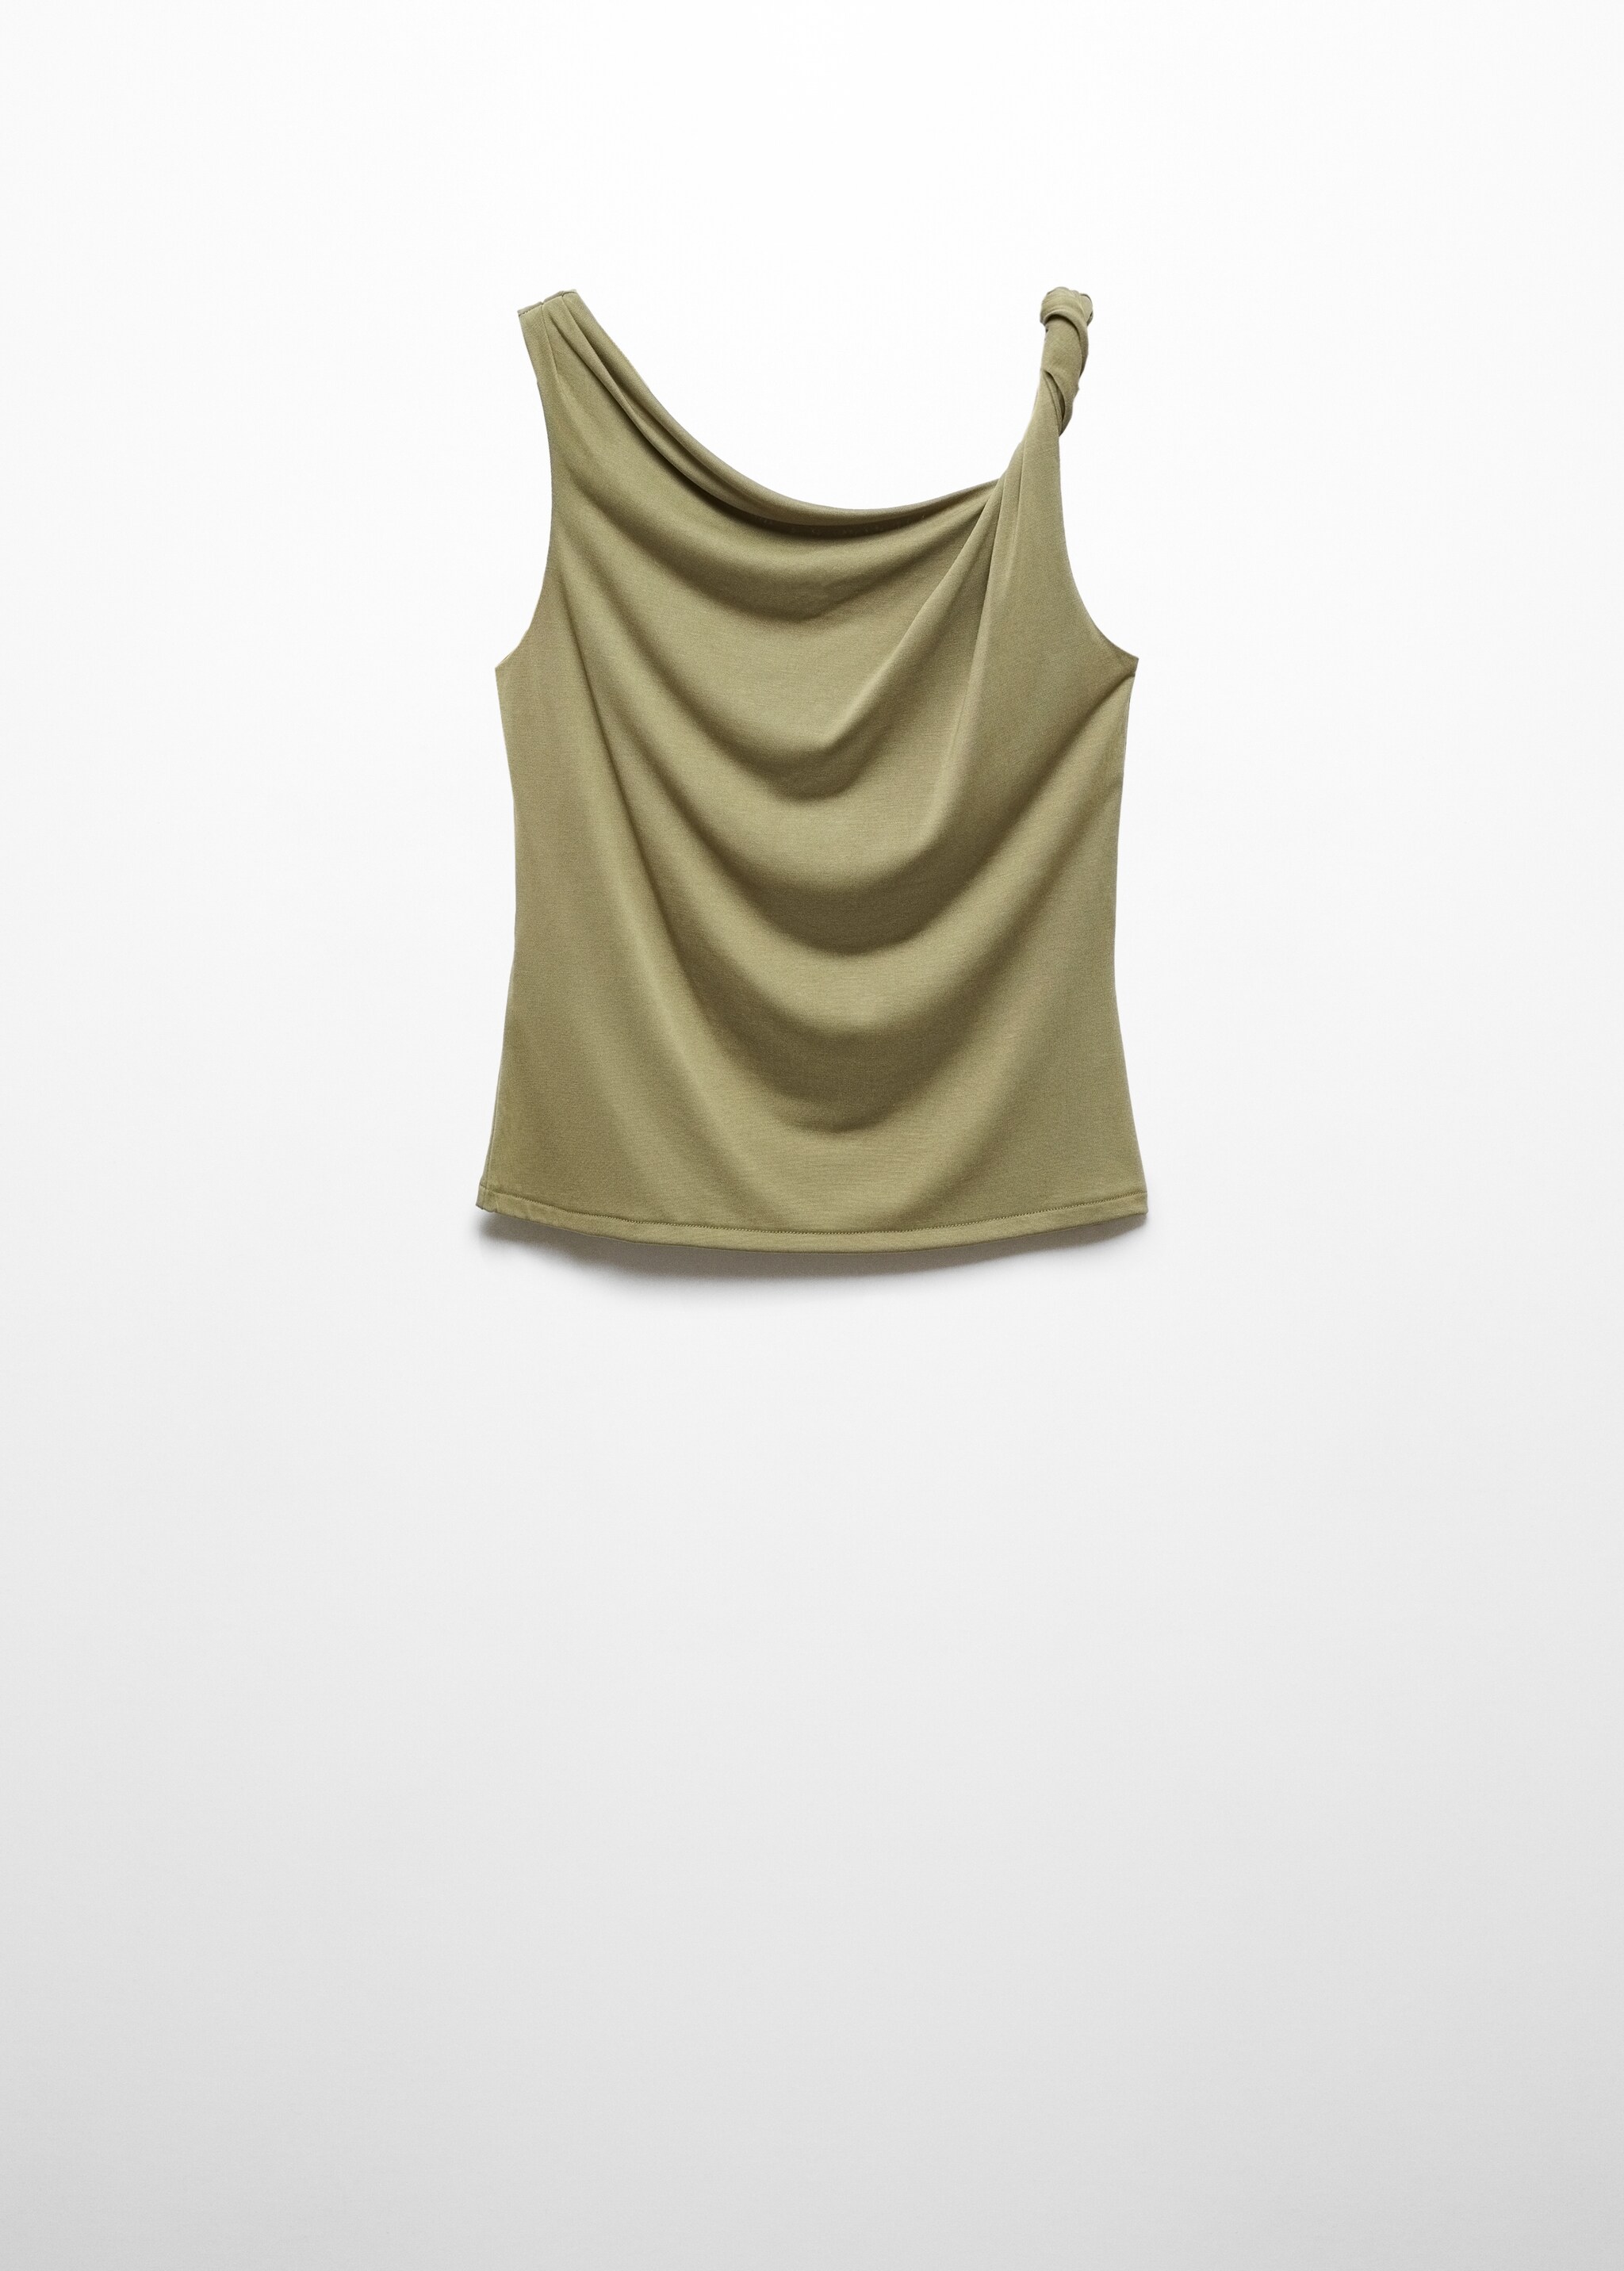 Draped detail top - Article without model